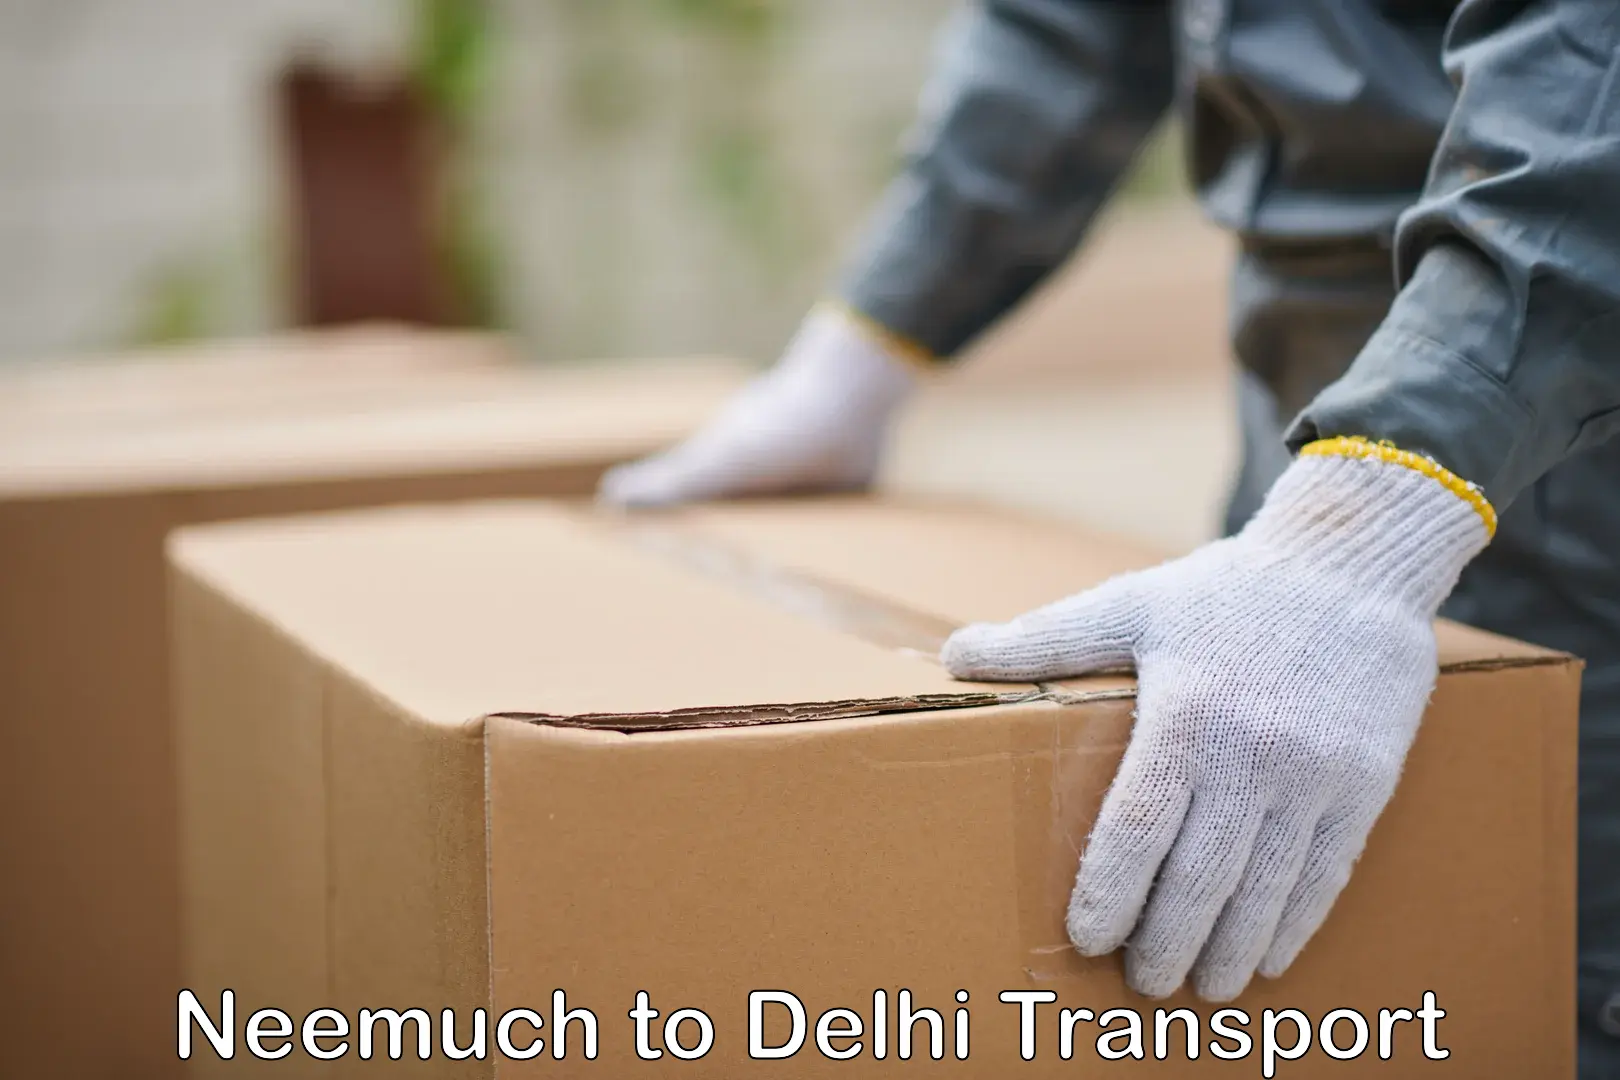 Cycle transportation service Neemuch to Delhi Technological University DTU